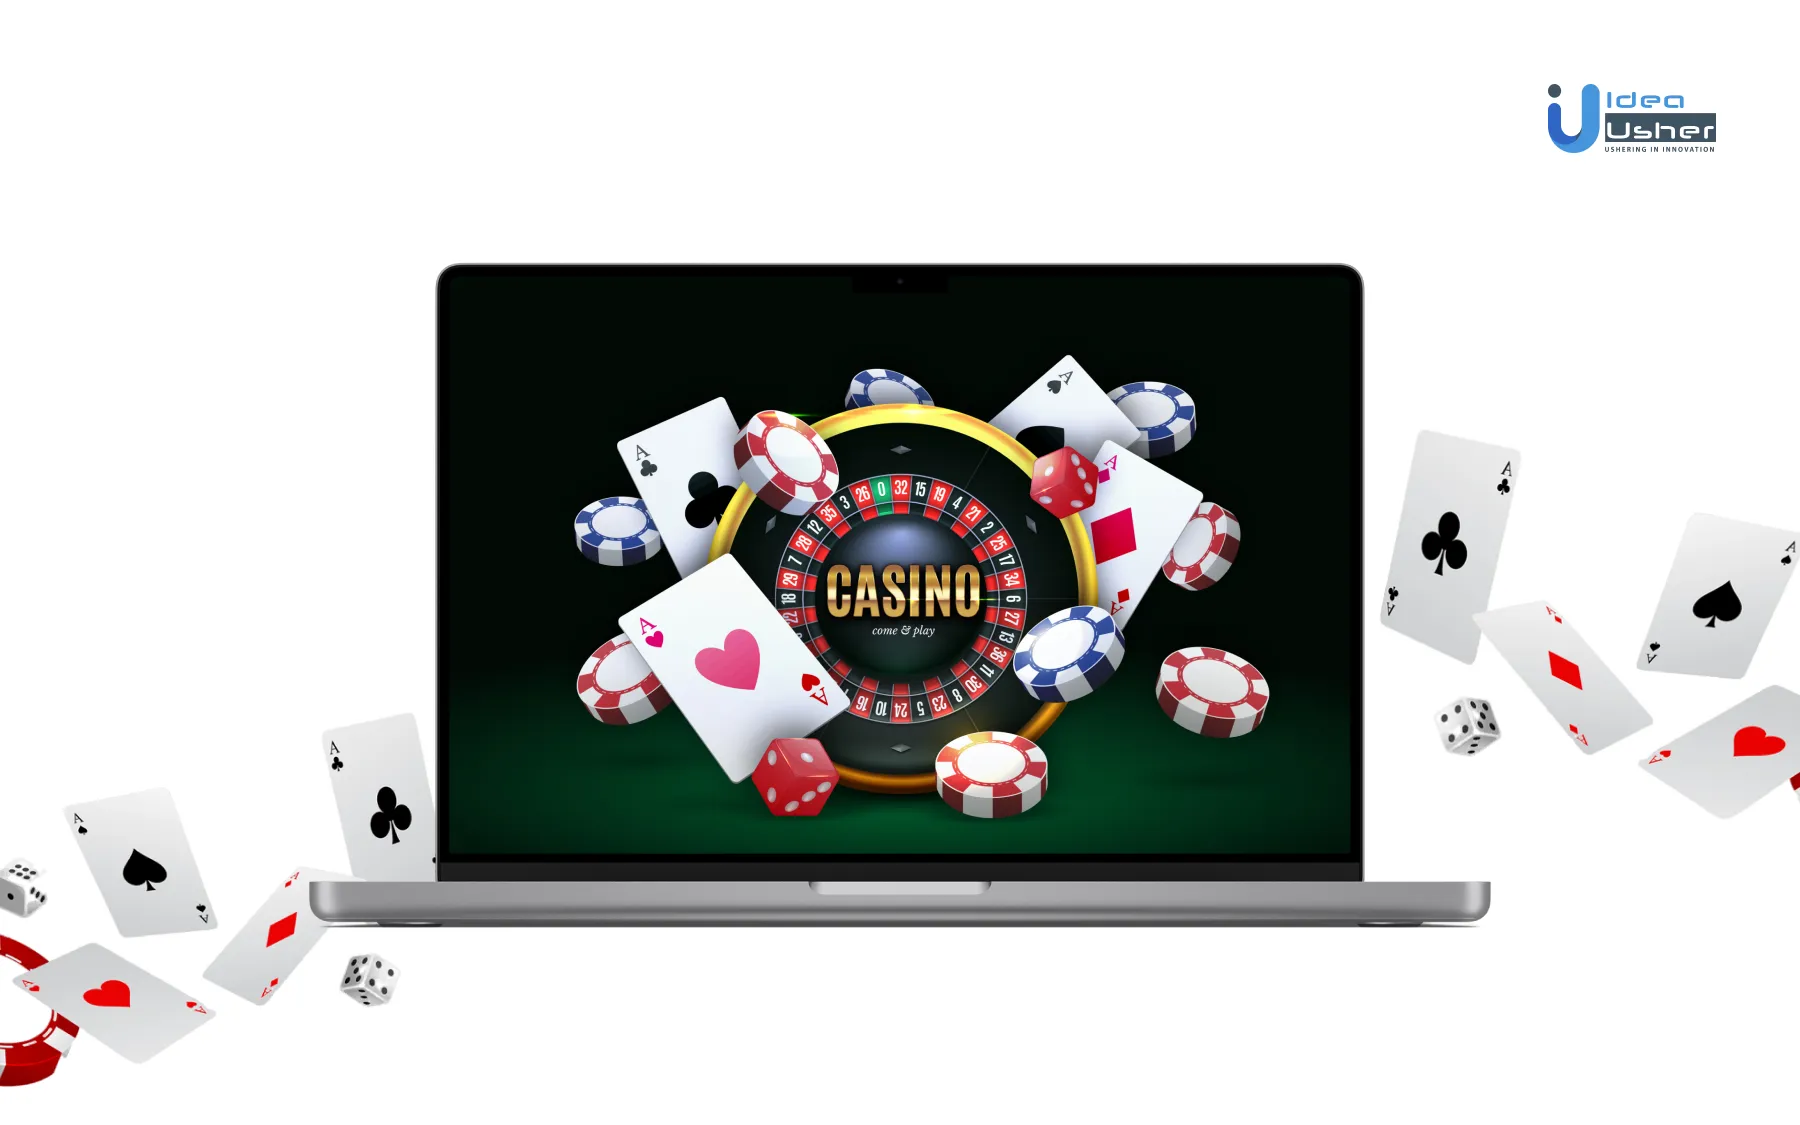 10 Powerful Tips To Help You Online Casino Games Popular among Indian Players Better